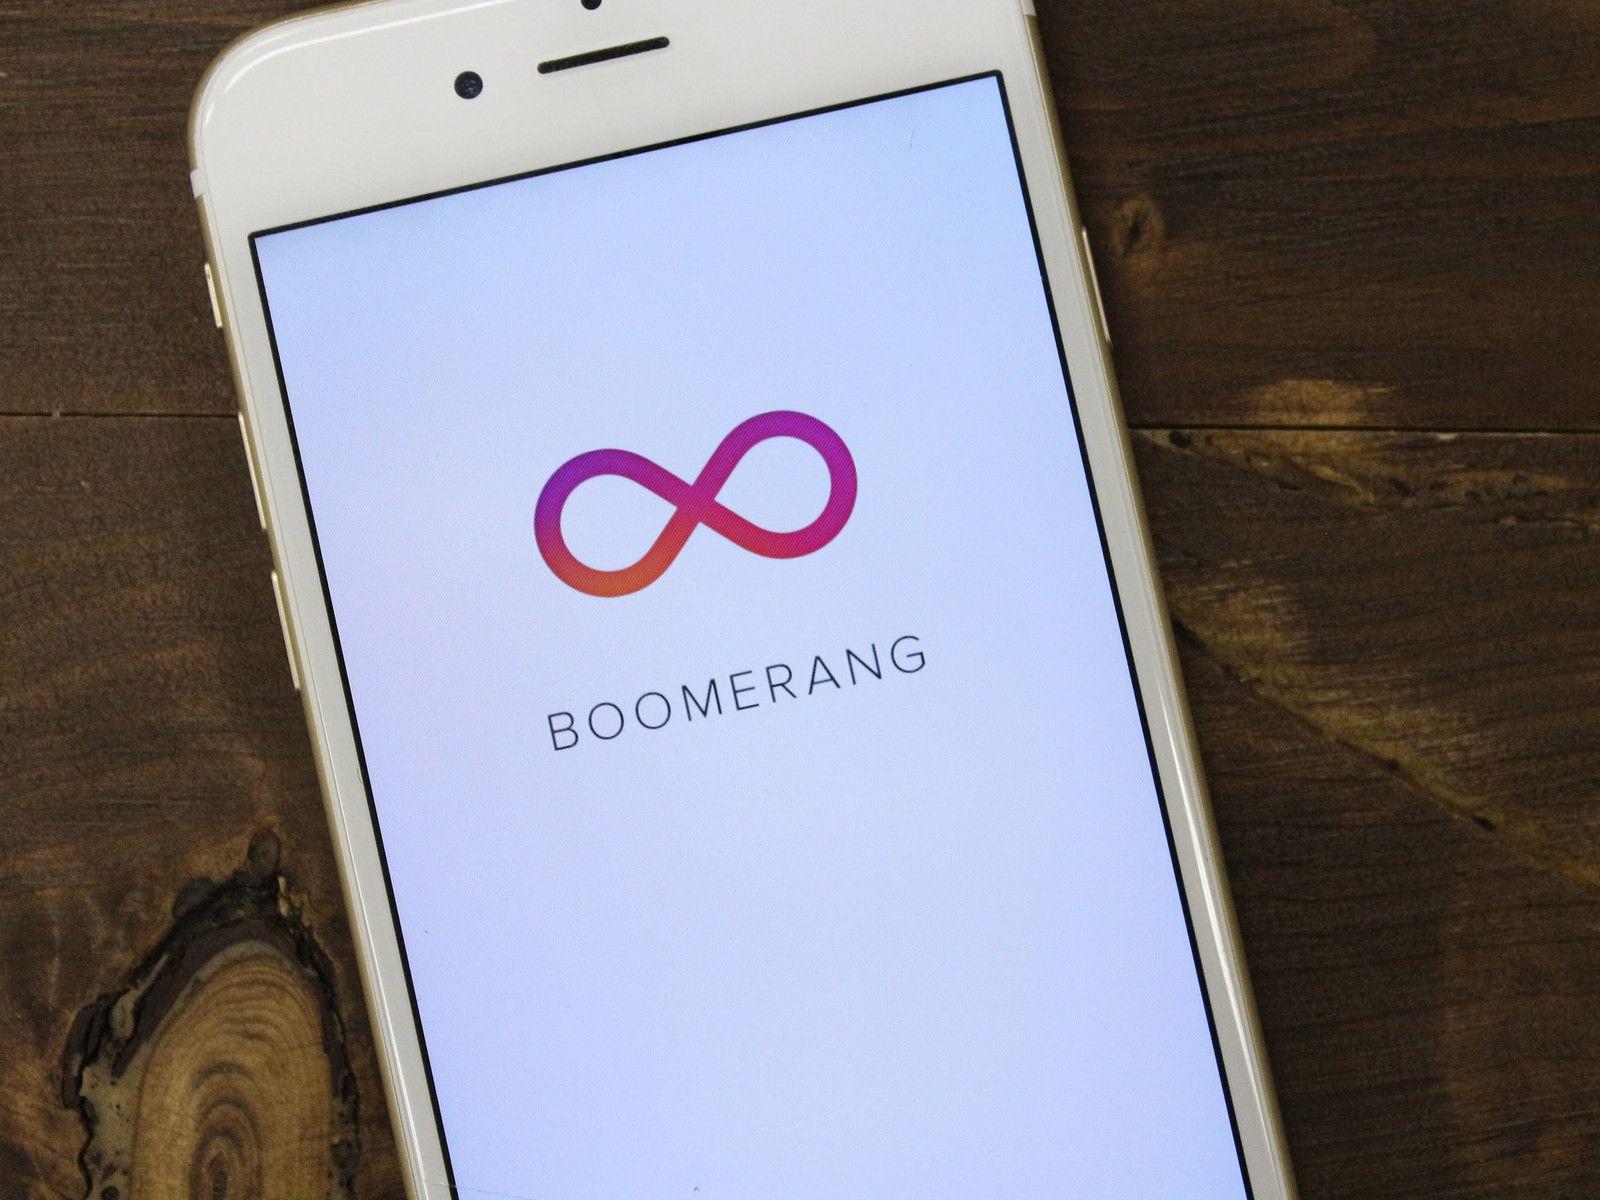 With 2 Silver Boomerangs Logo - What the heck is Boomerang?